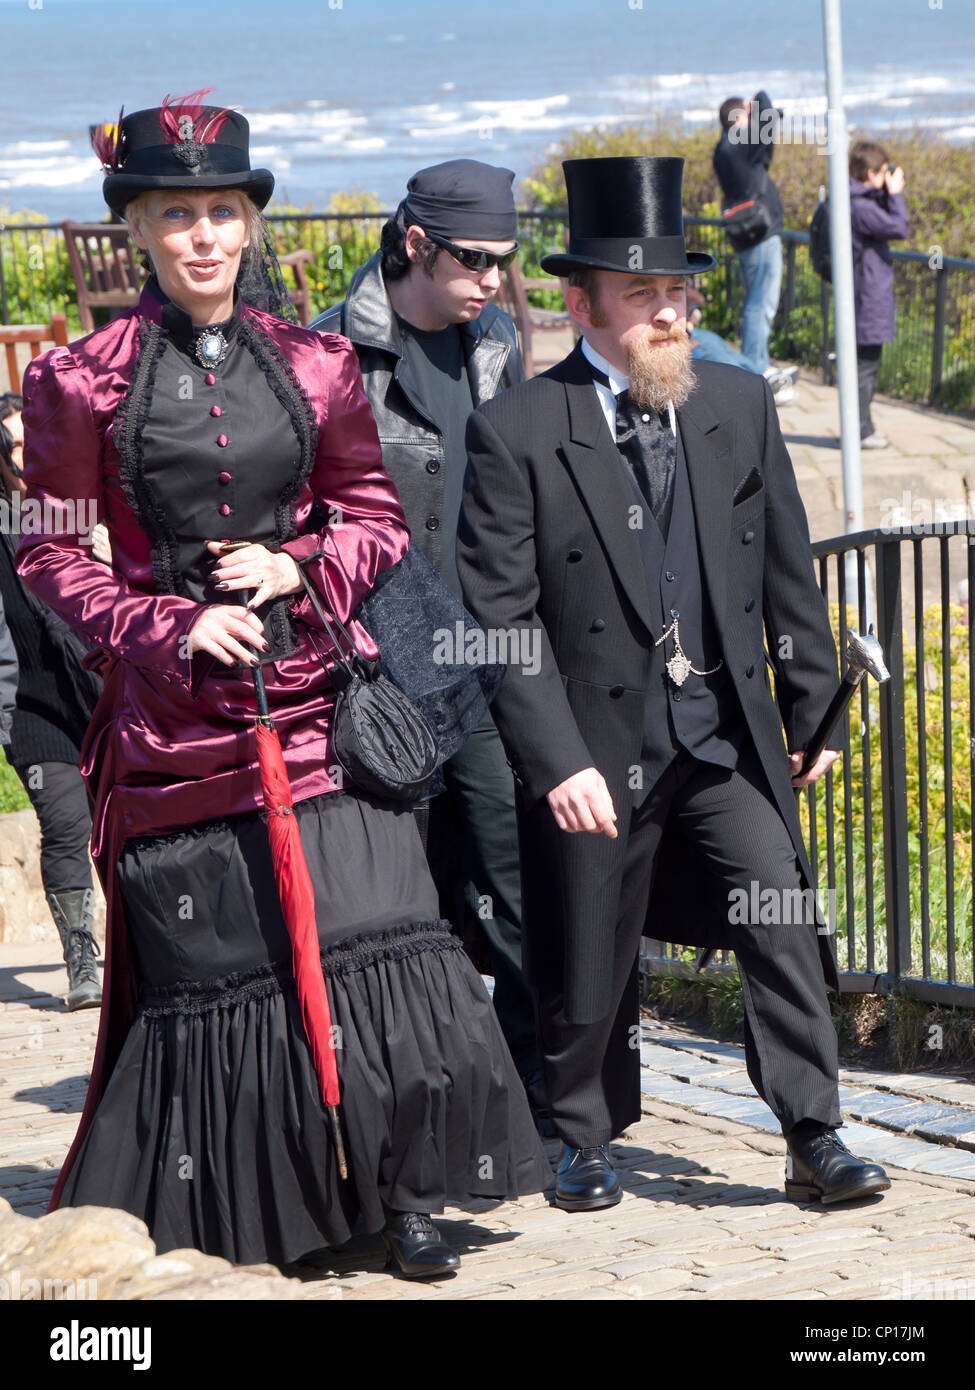 https://c8.alamy.com/comp/CP17JM/a-man-and-his-woman-partner-in-victorian-gothic-dress-at-the-whitby-CP17JM.jpg